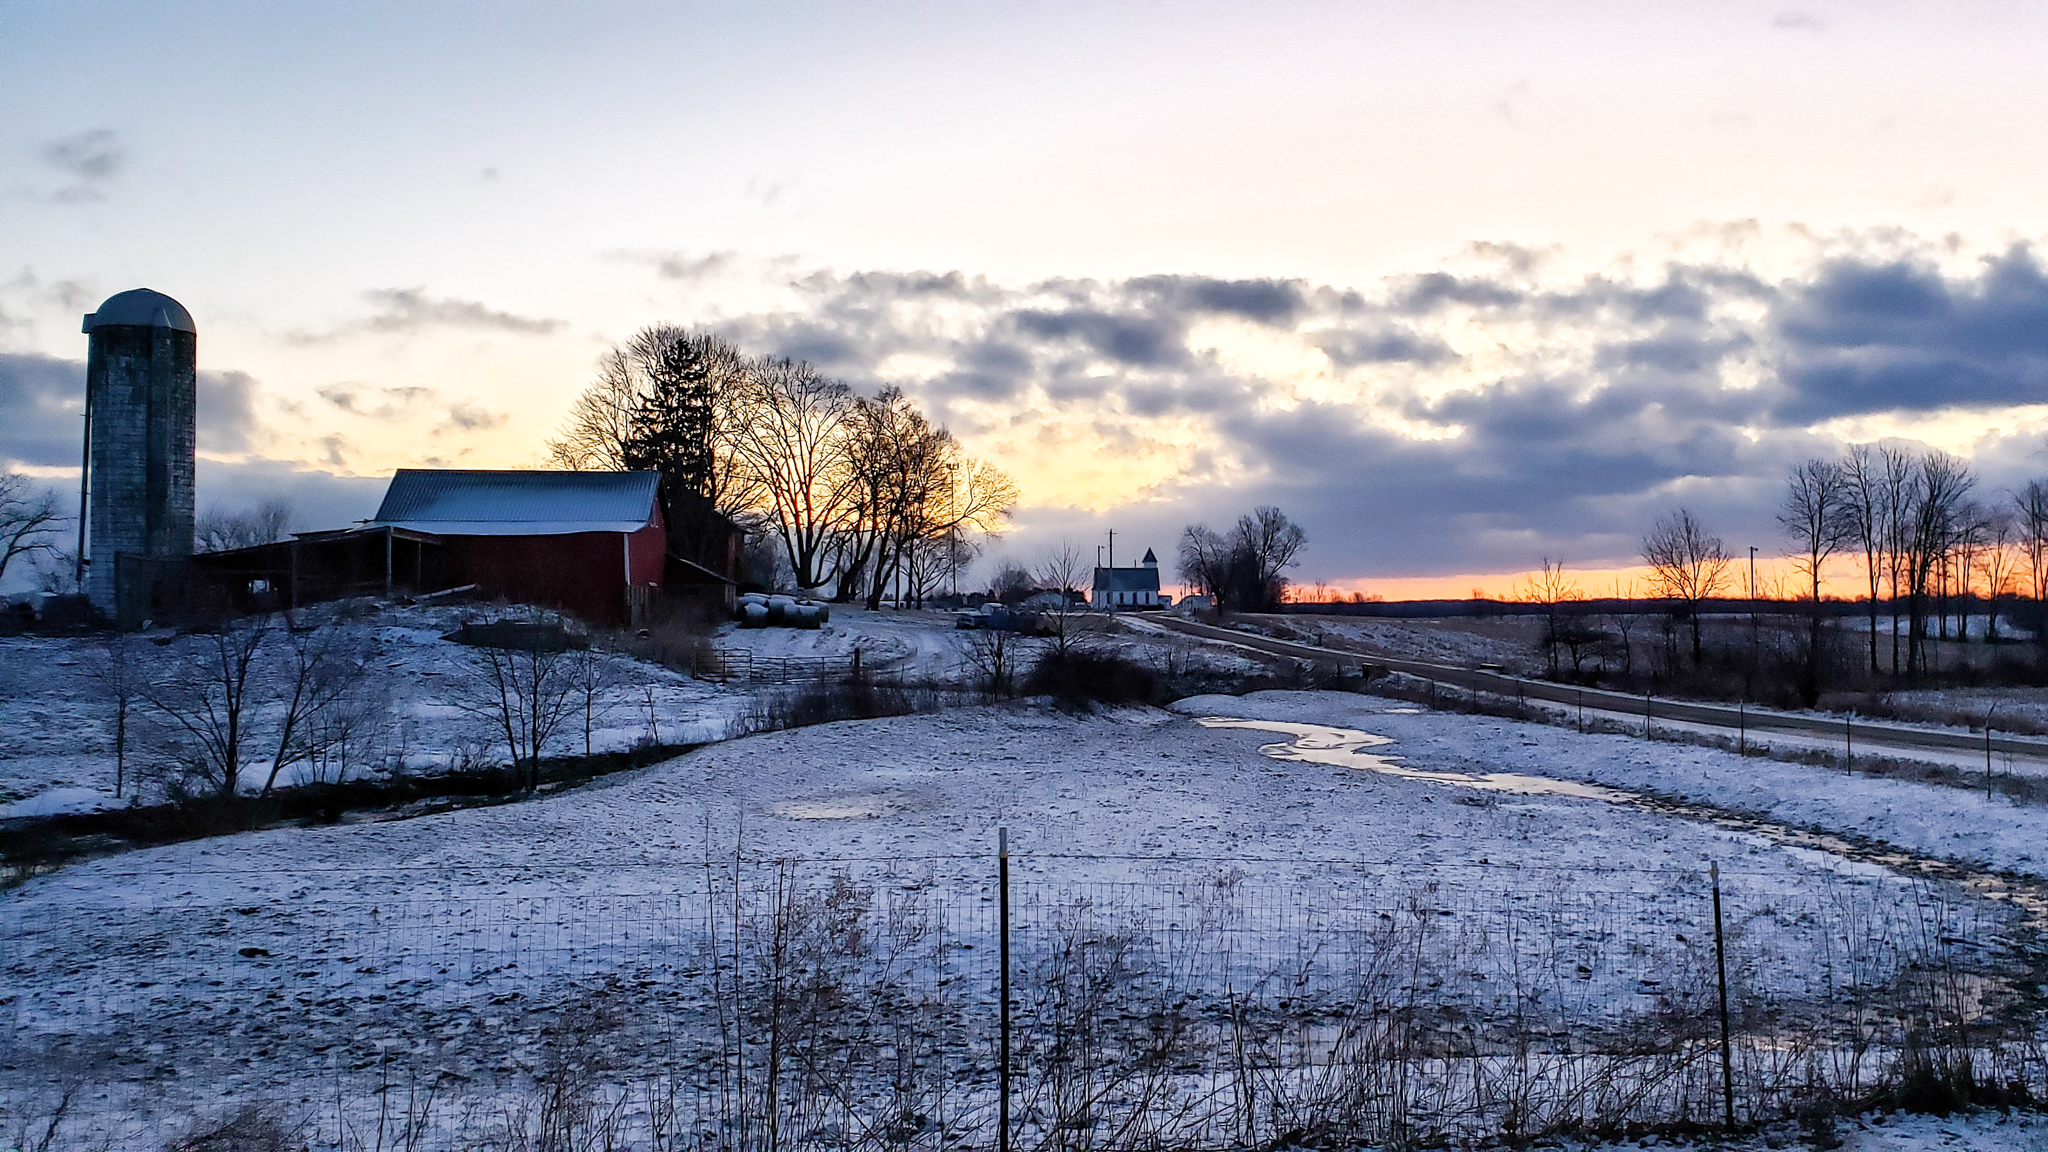 25-January-2019 Winter first light in Miller Township